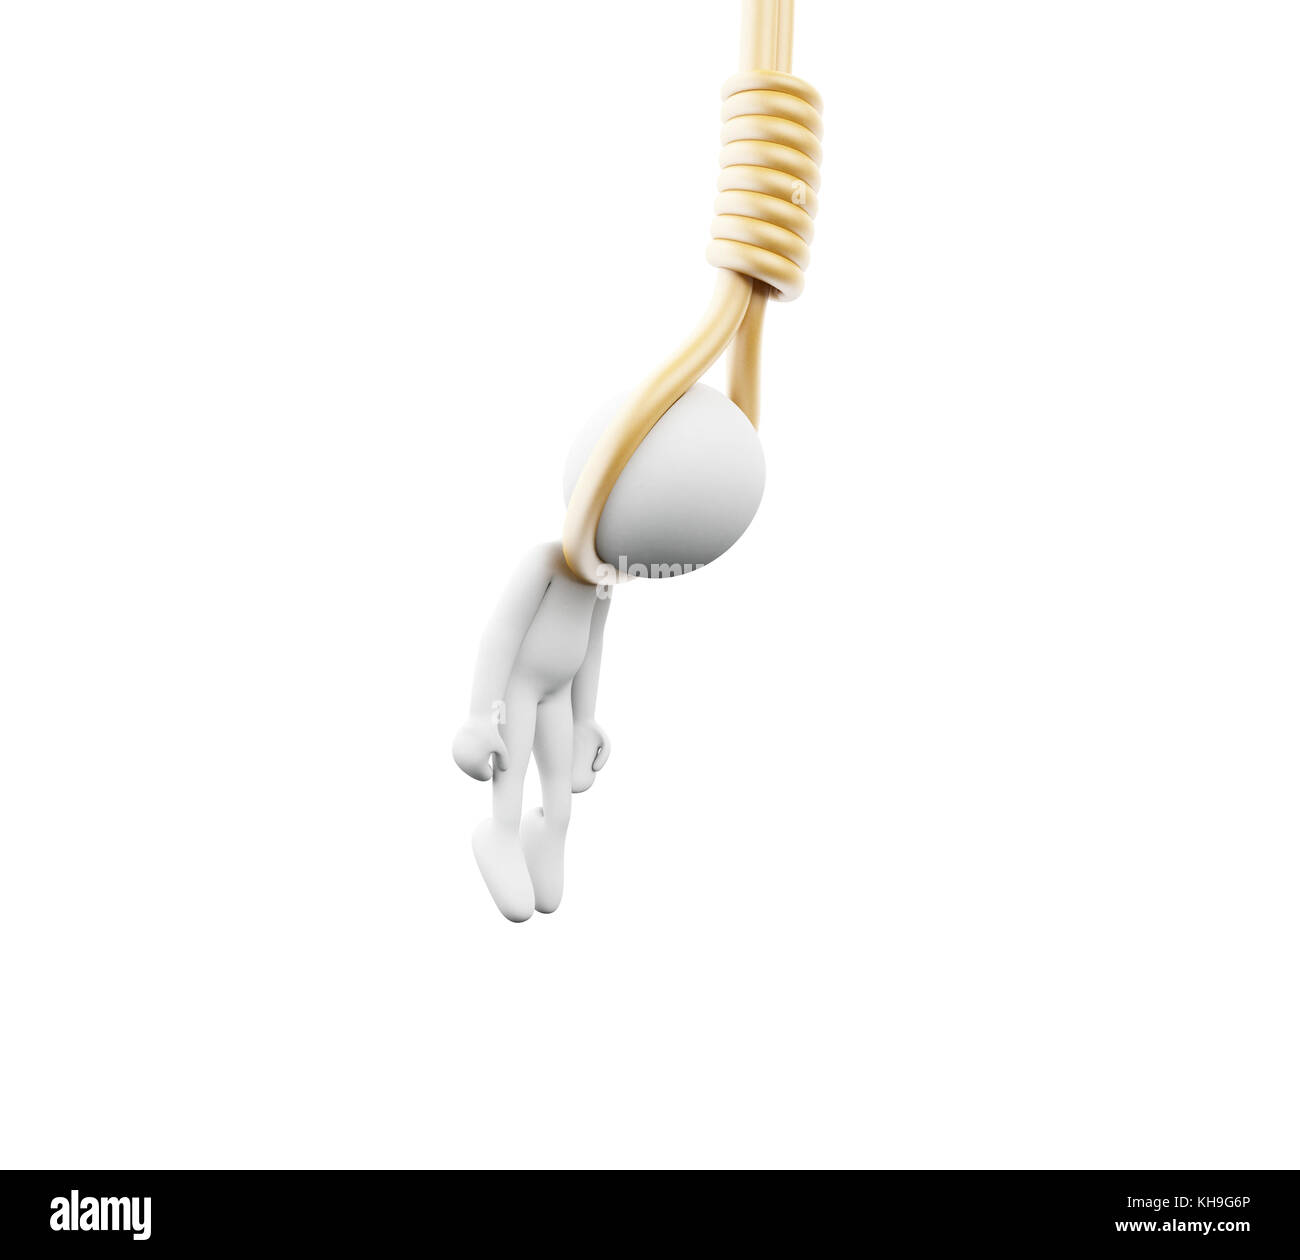 3d illustration. White people hanged with a rope. Suicide concept. Isolated white background Stock Photo